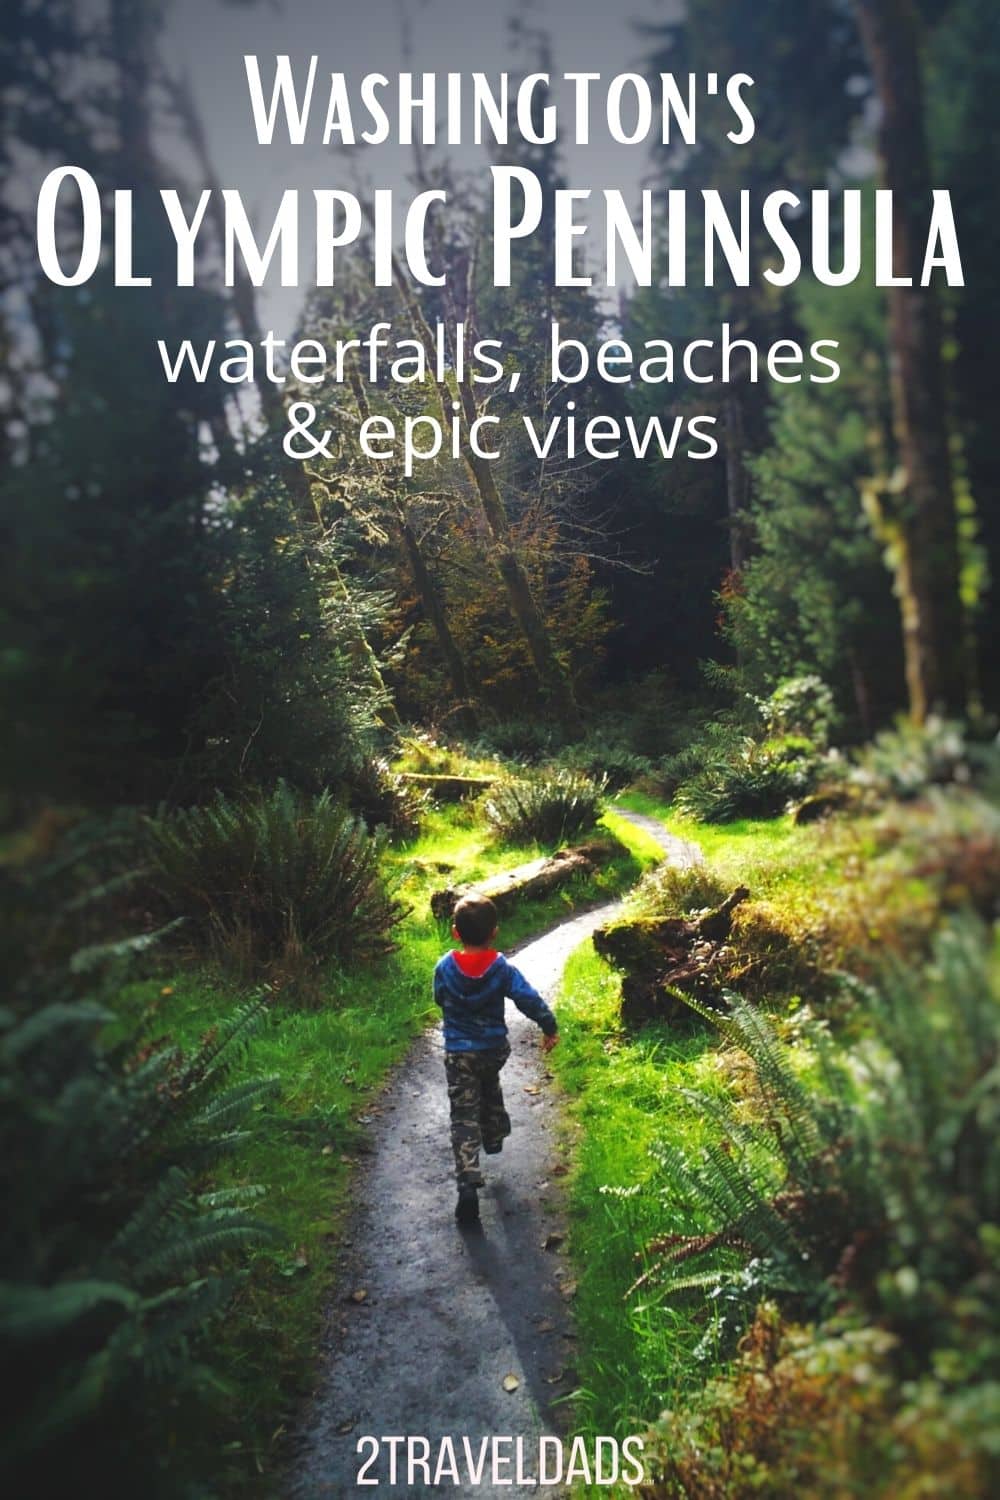 The best things to do on the Olympic Peninsula, including Olympic National Park sites, beaches, lighthouse and more. When to visit the Olympic Peninsula, free activities, and epic views in Washington State.